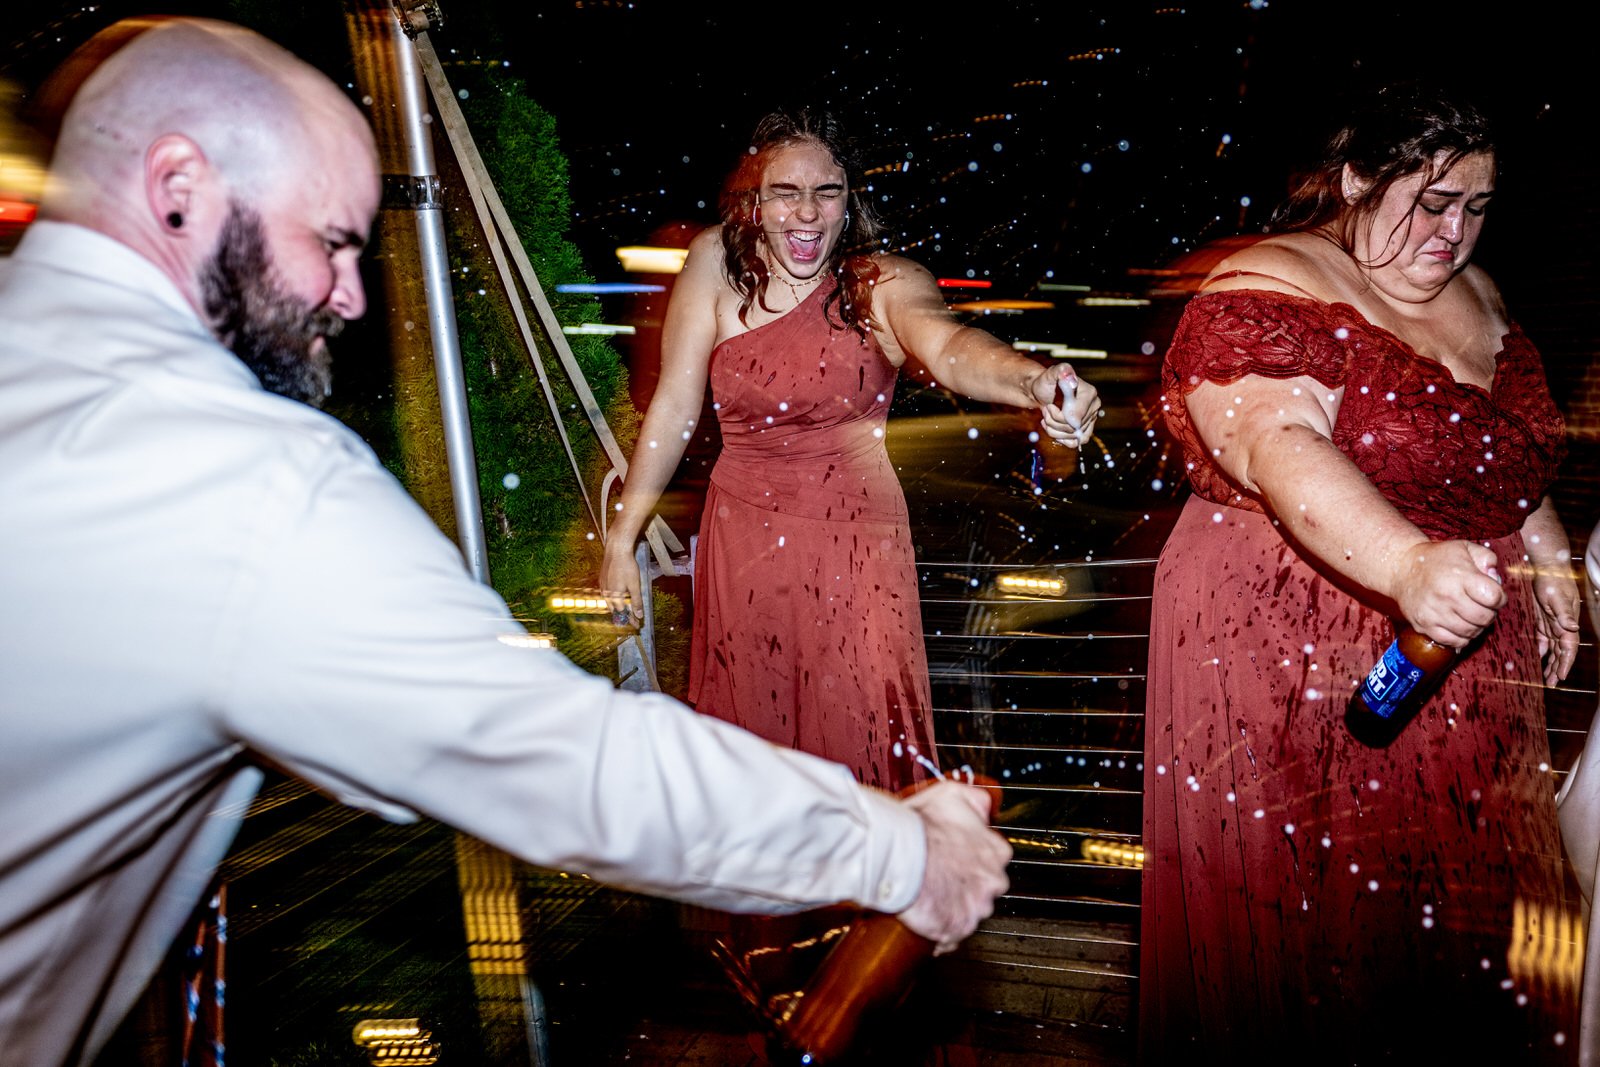 Ampersea_Baltimore_Maryland_Wedding_Suzanne&Andrew_Dance_Party-6813.jpg